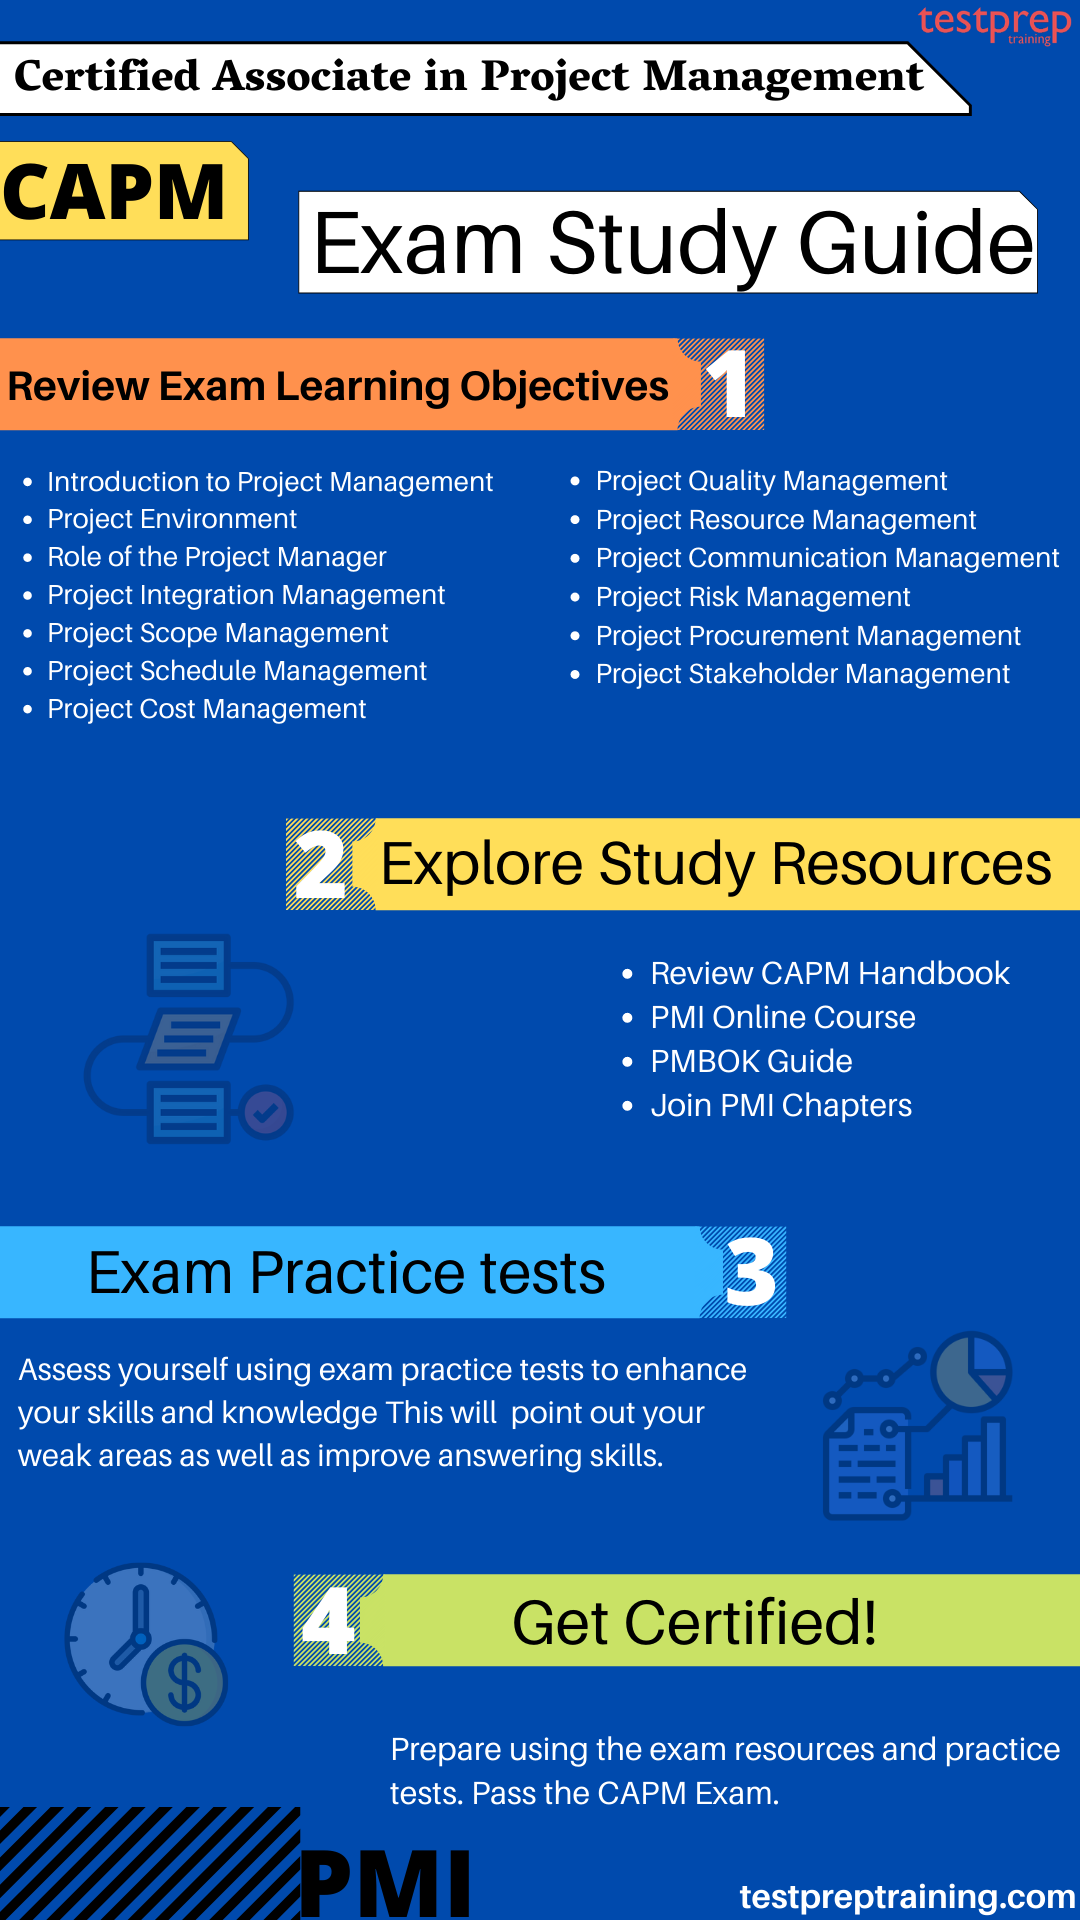 Certified Associate in Project Management (CAPM) Study guide